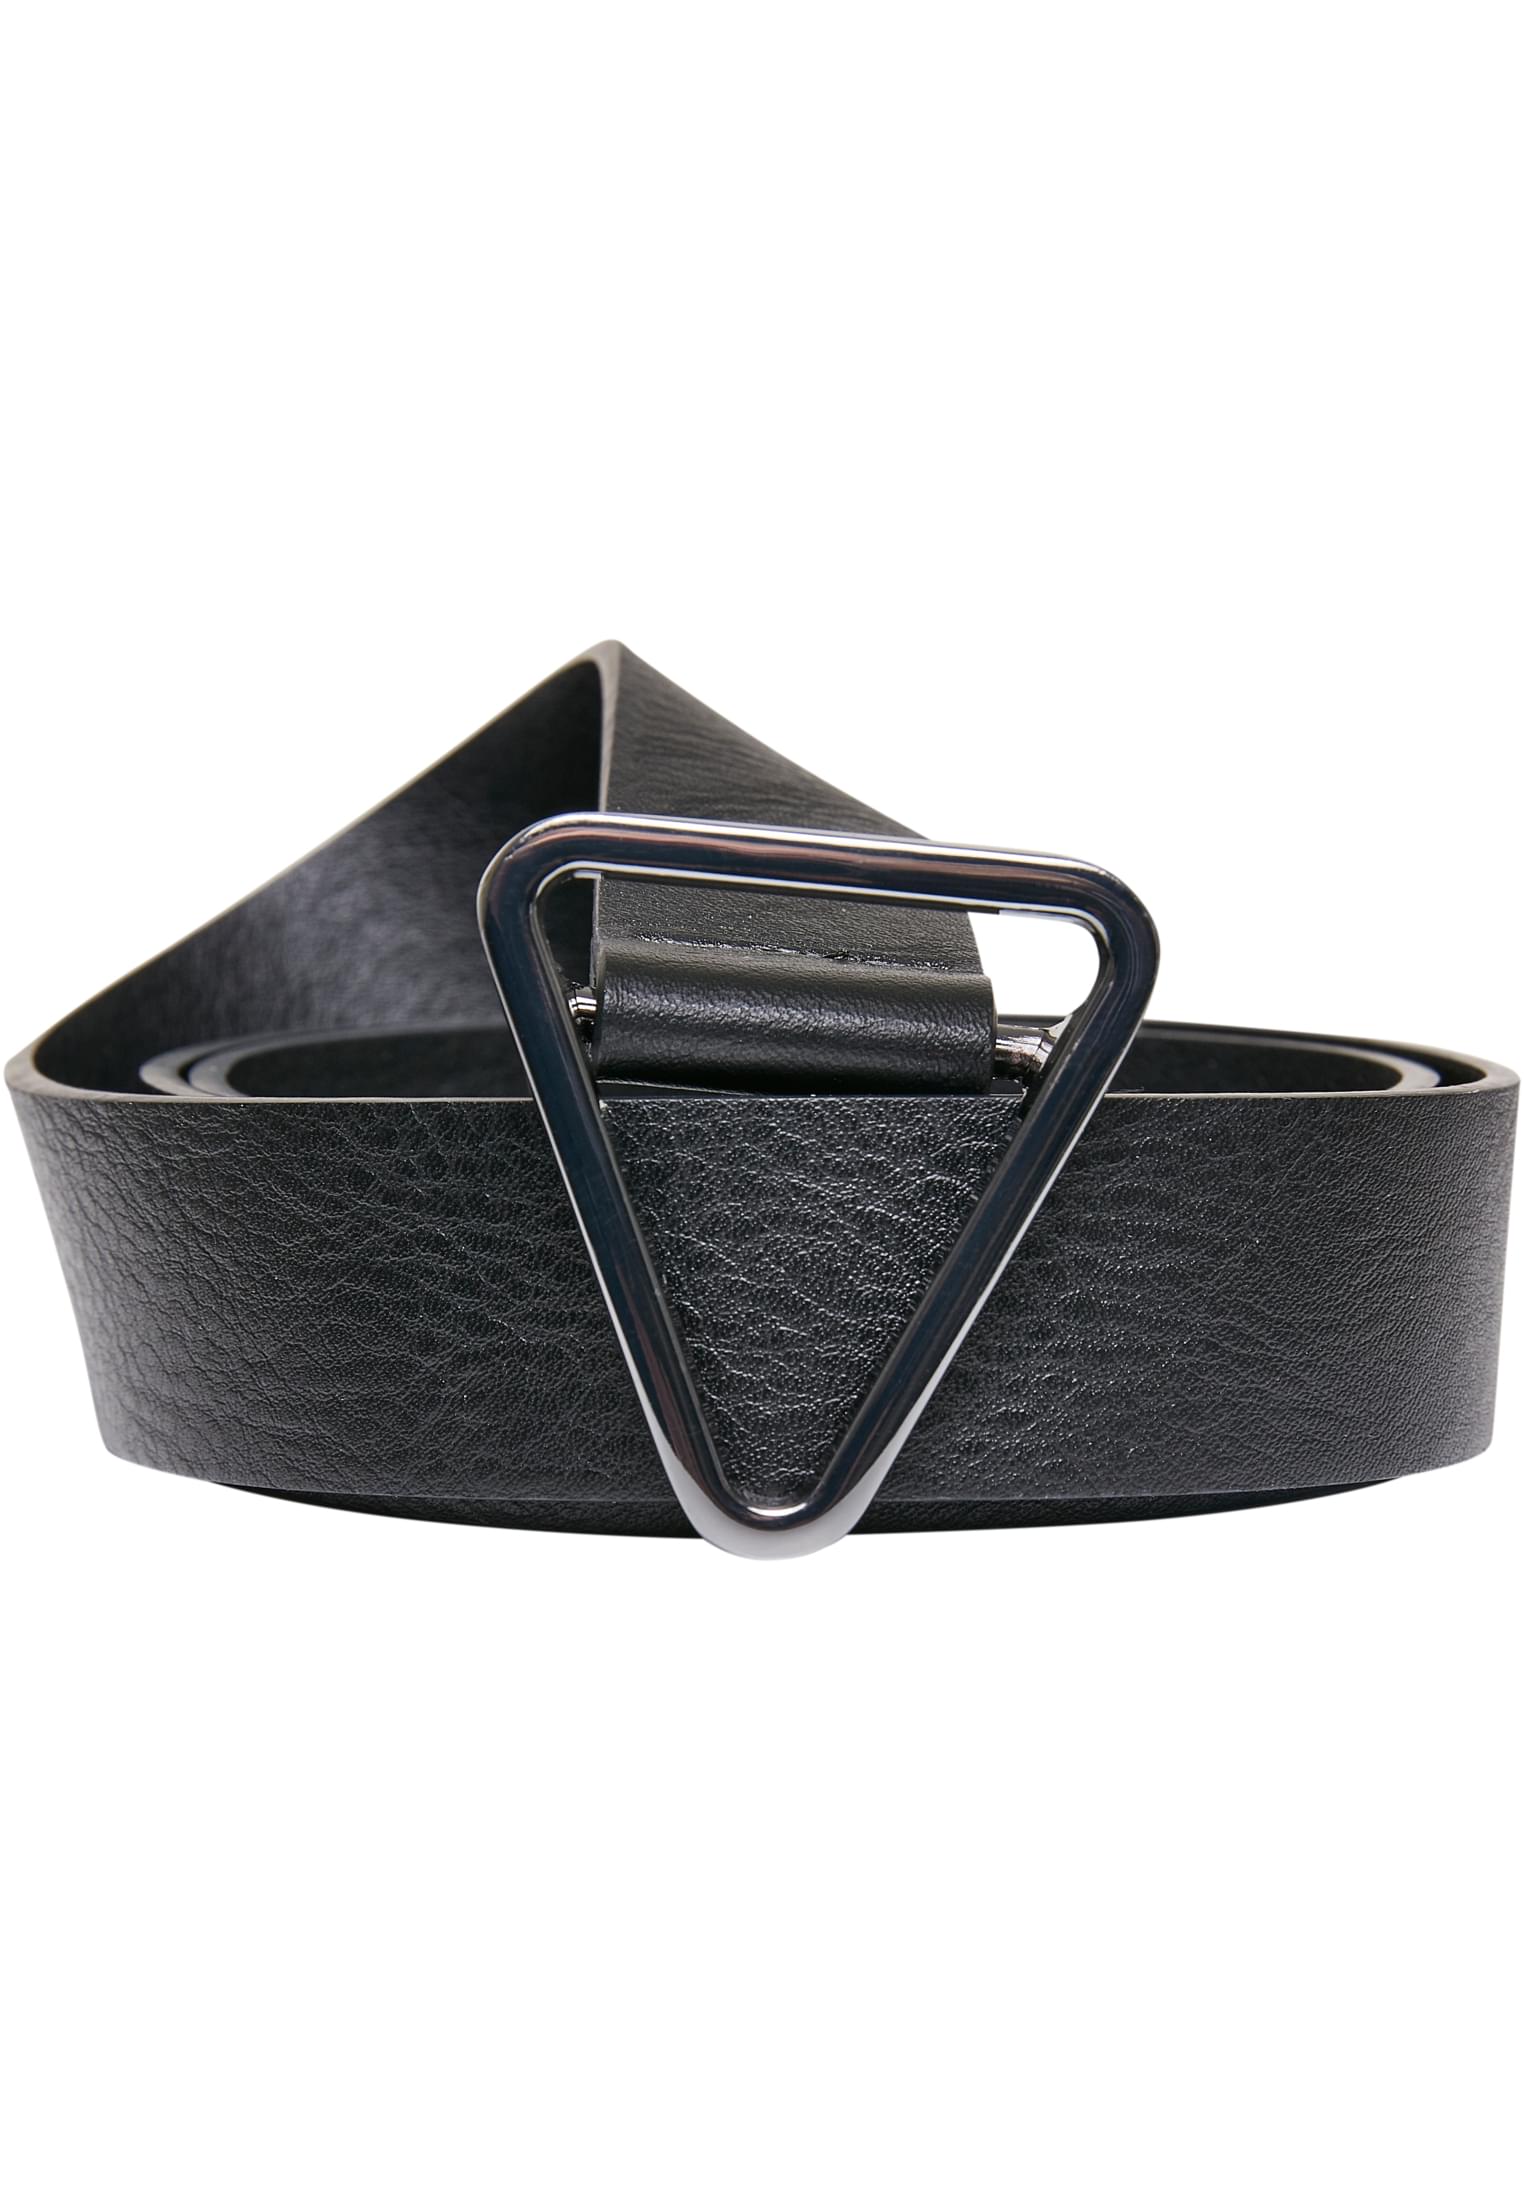 Triangular buckle belt made of synthetic leather, black